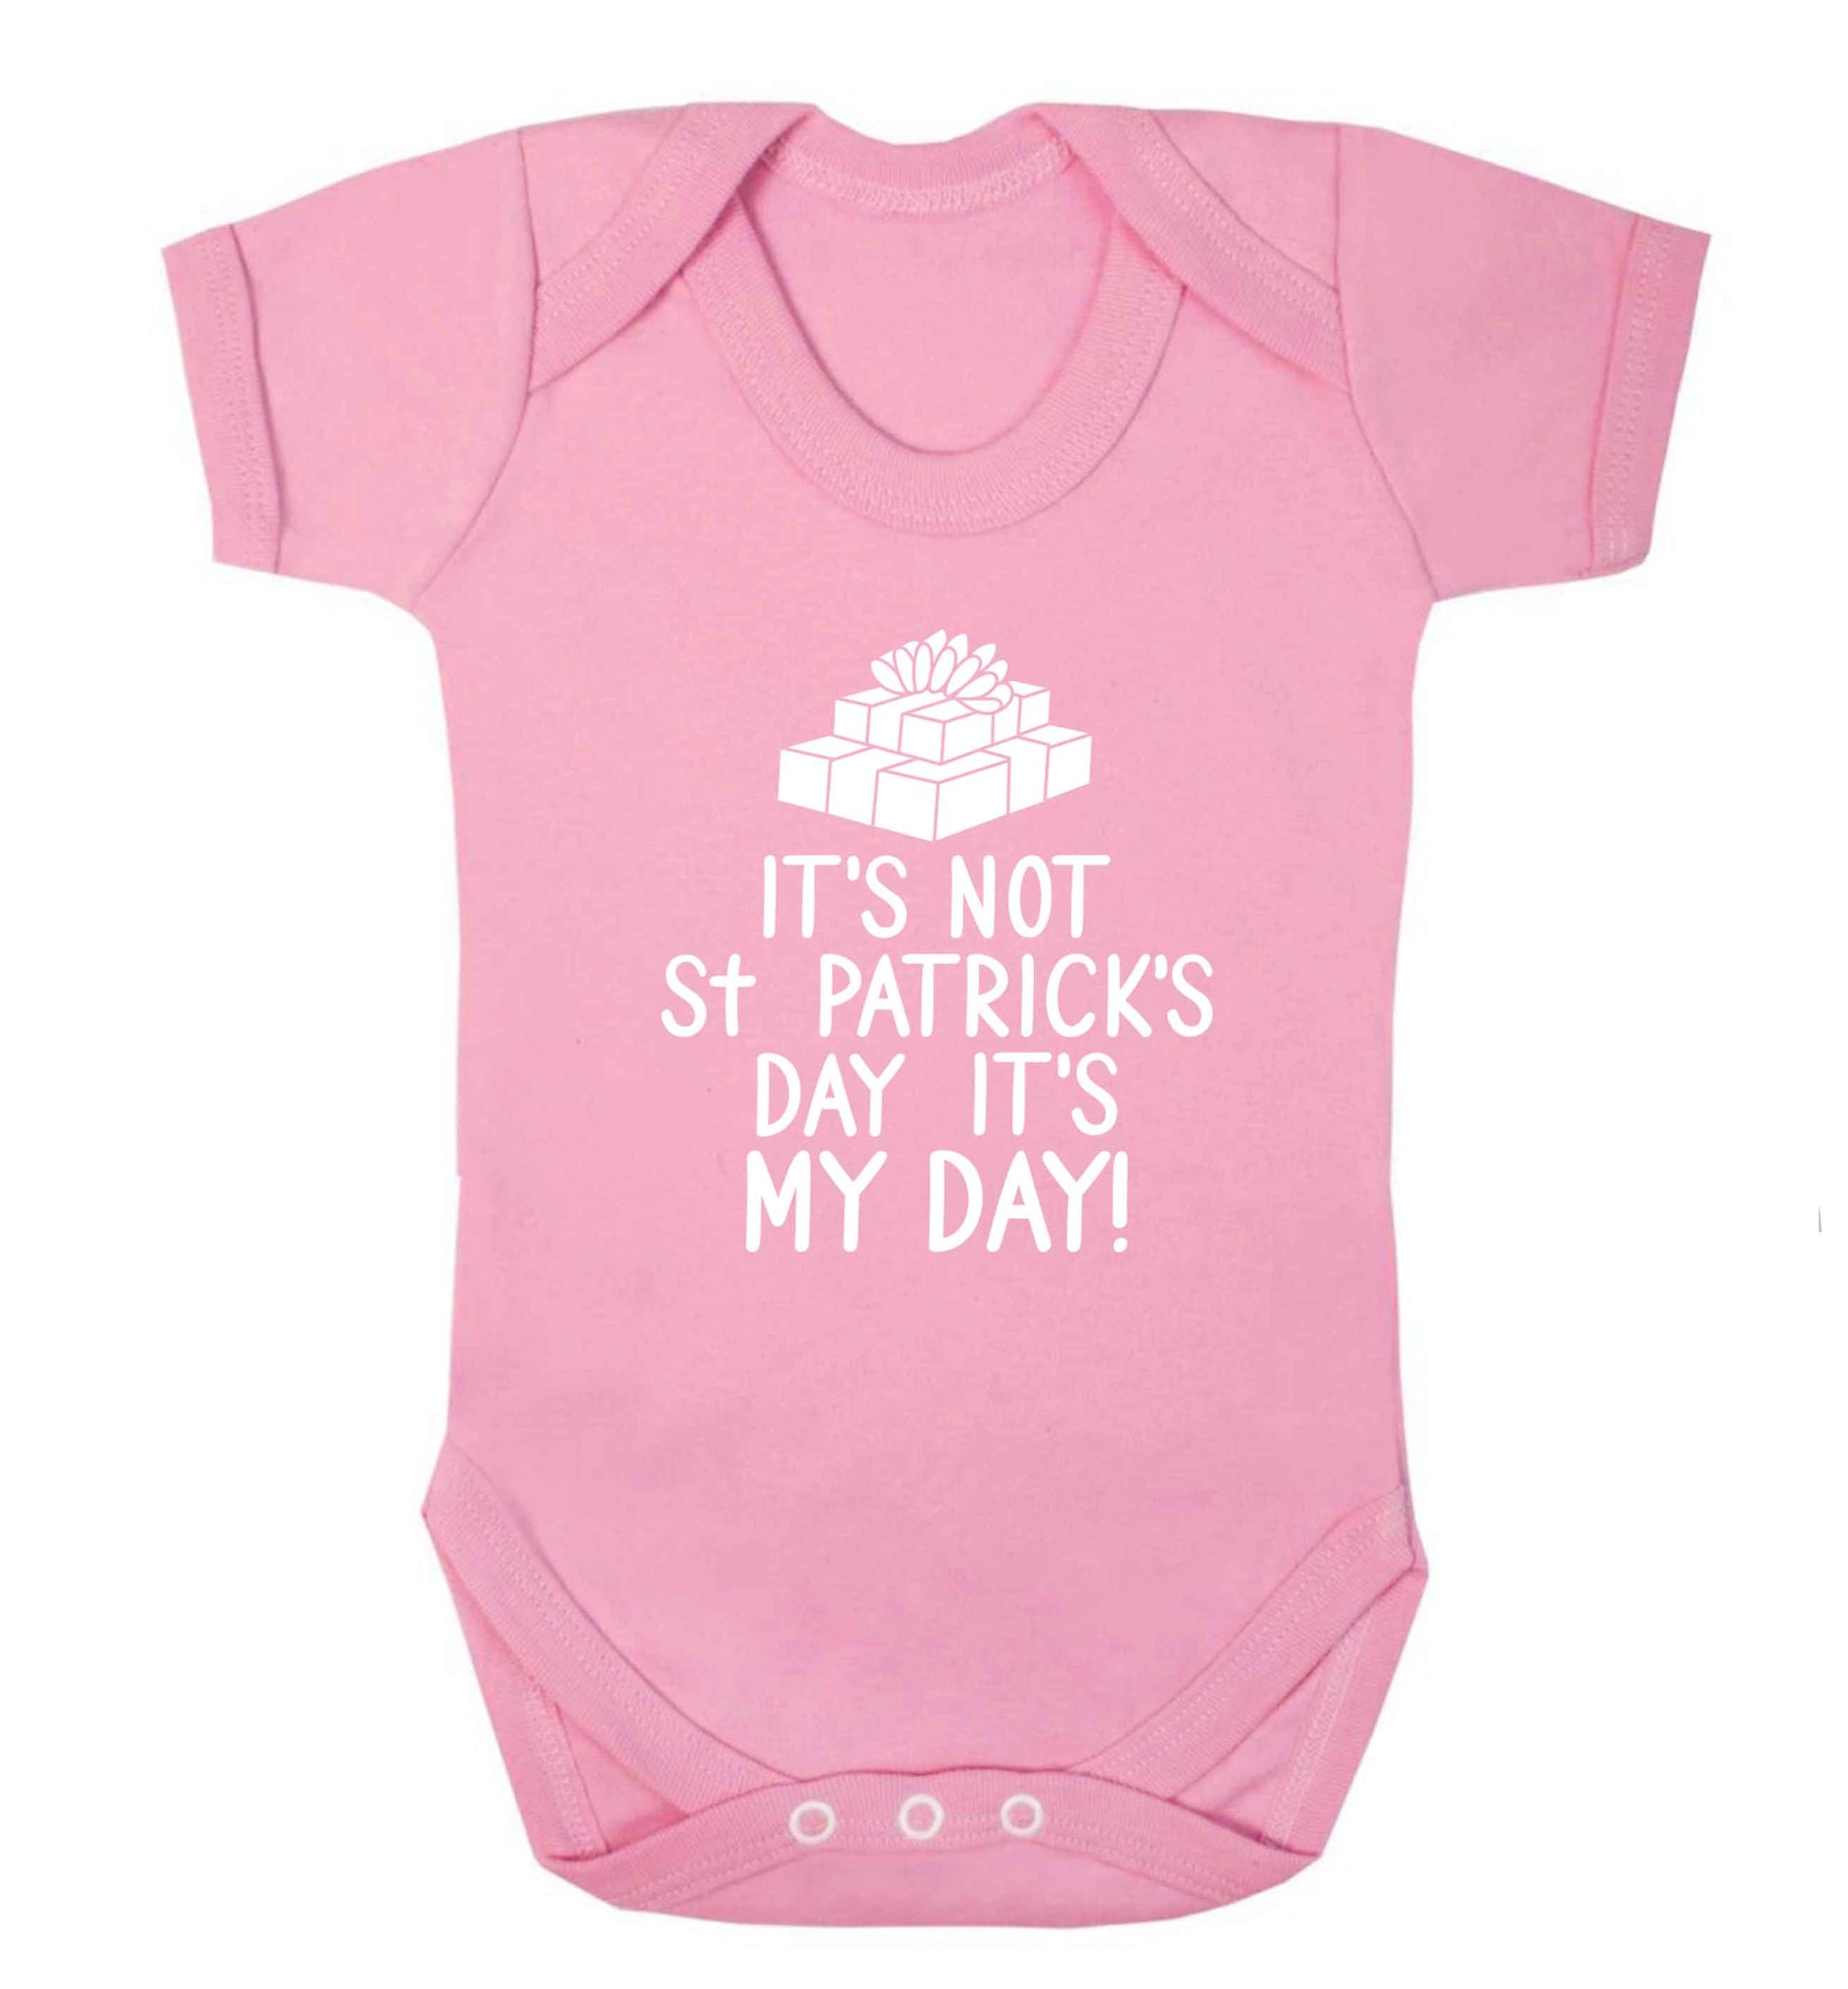 Funny gifts for your mum on mother's dayor her birthday! It's not St Patricks day it's my day baby vest pale pink 18-24 months